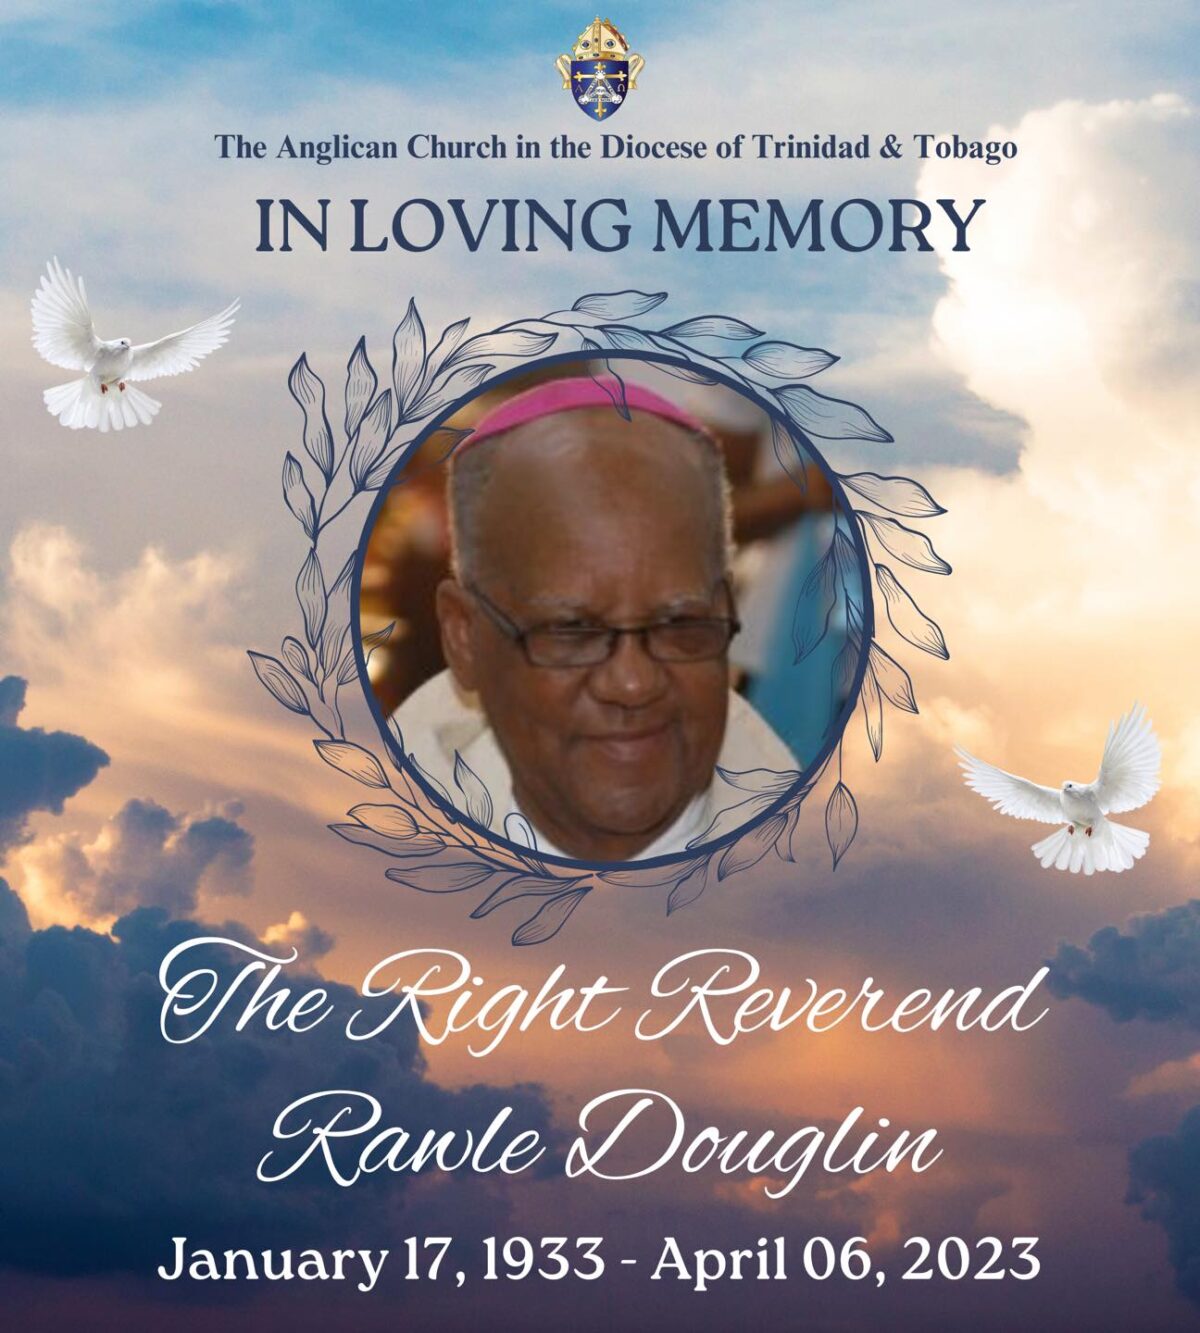 The passing of The Right Reverend Rawle Ernest Douglin